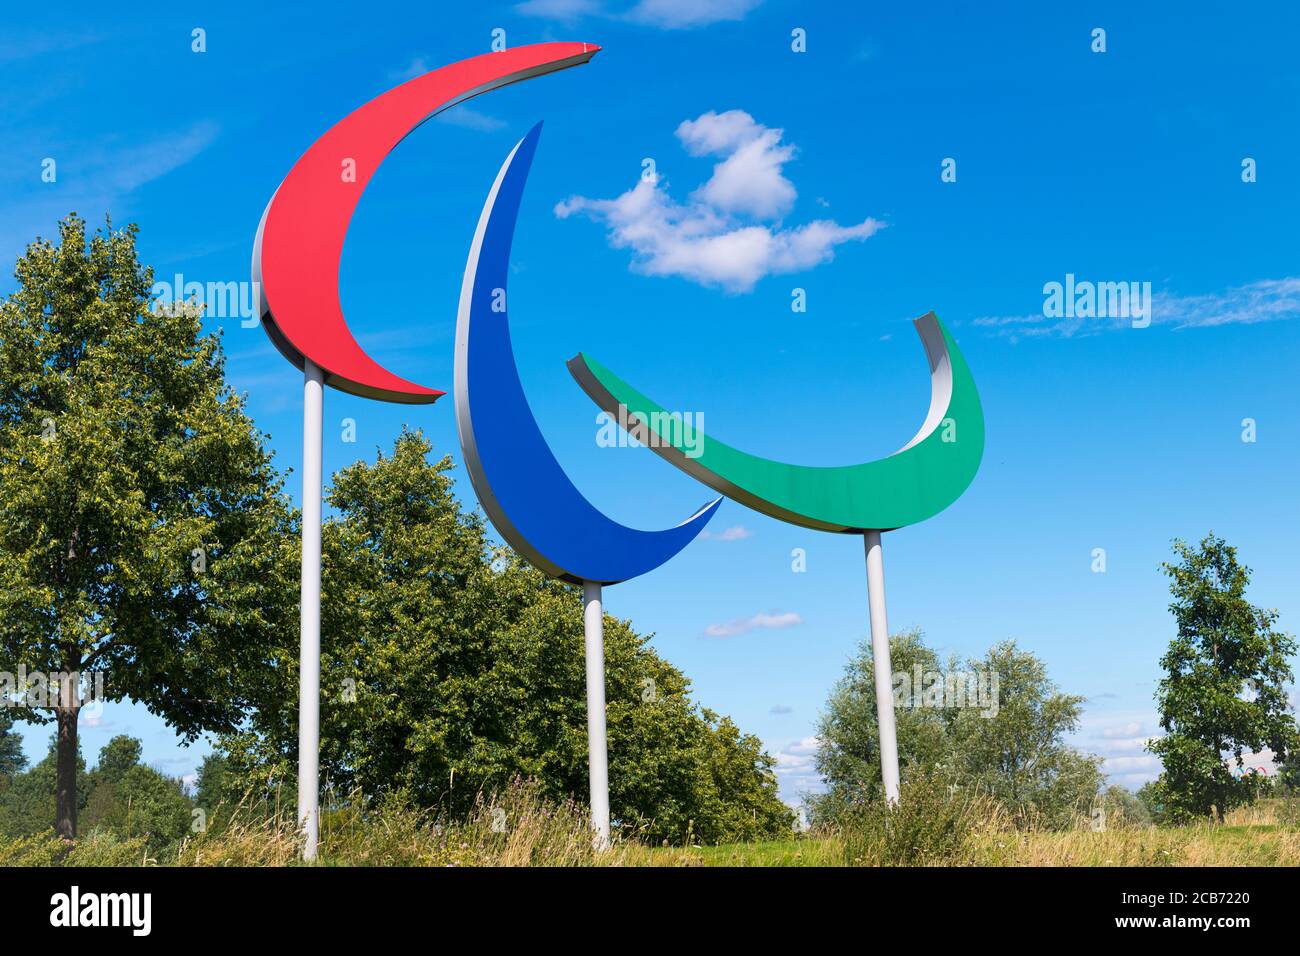 England London Stratford Hackney Wick Queen Elizabeth Park Paralympic logo sign red blue green Lee Valley blue sky clouds trees Stock Photo